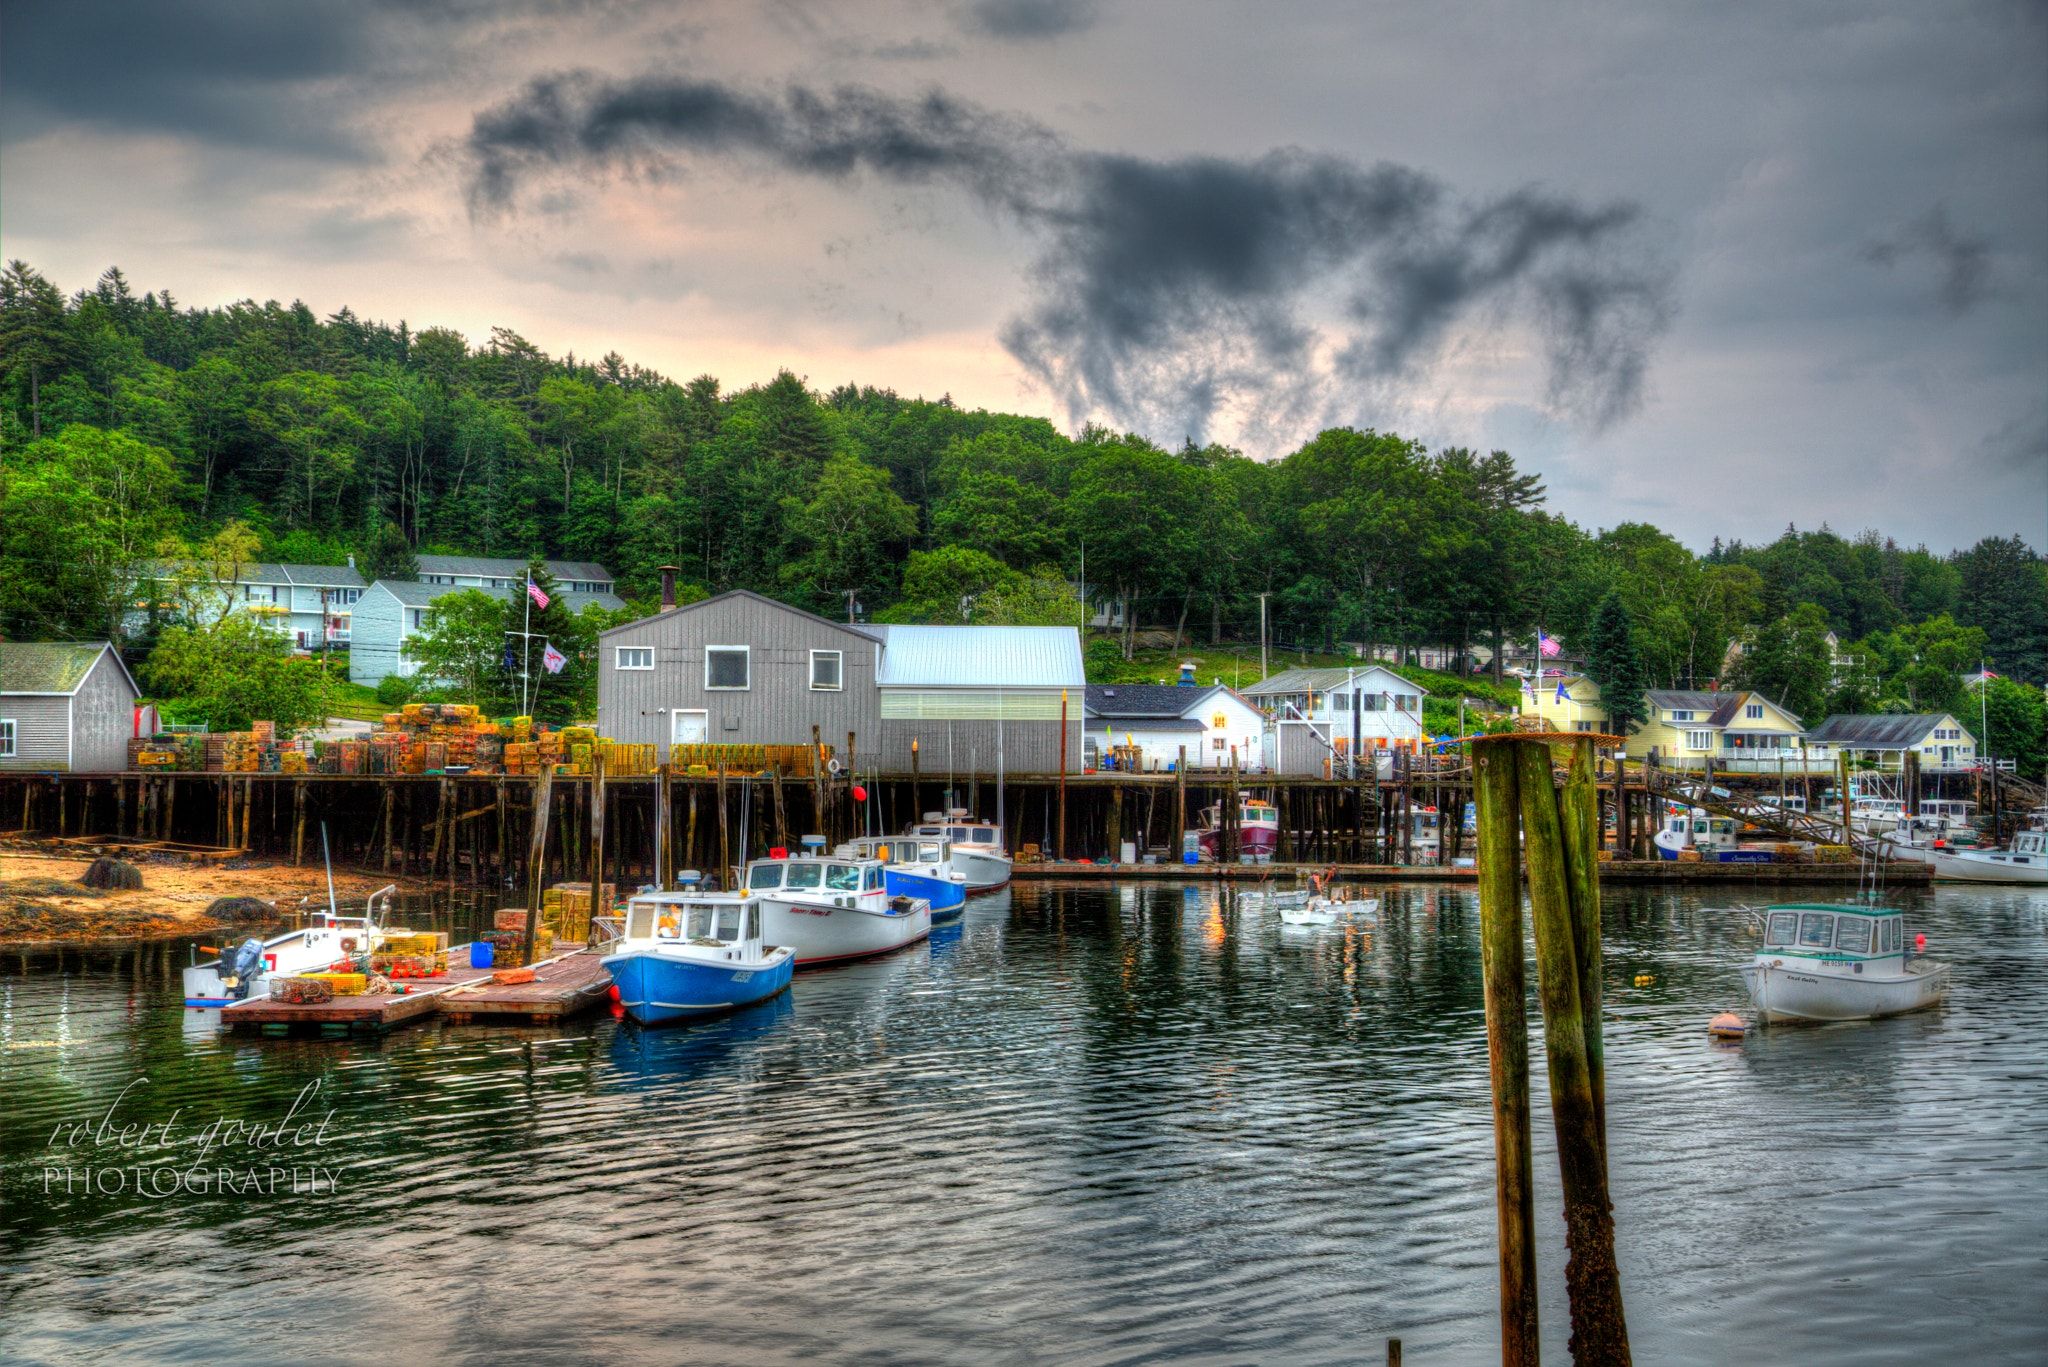 Bay In HDR - null | photography | Pinterest | HdR and Robert goulet